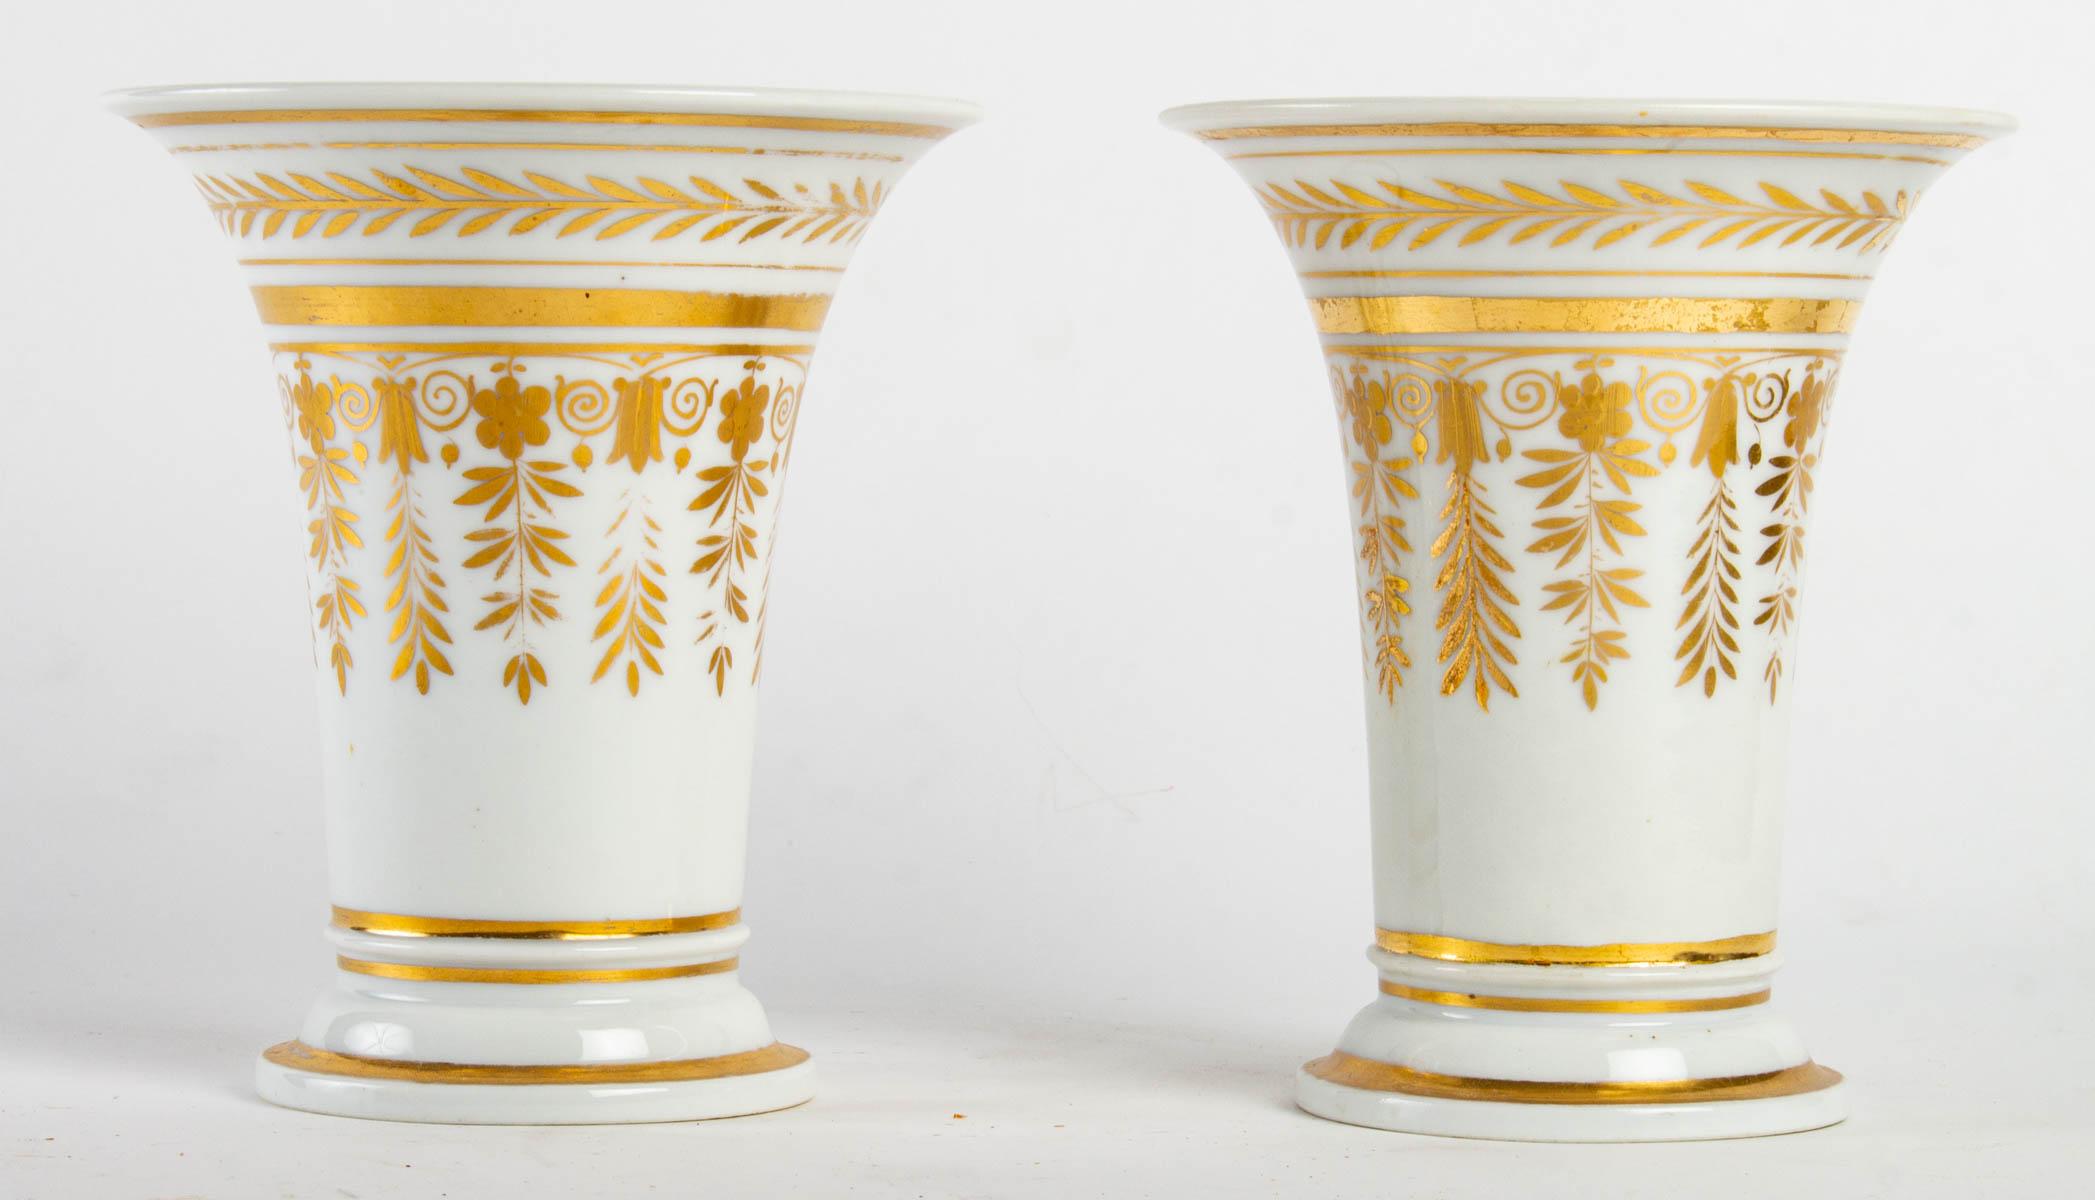 Early 19th Century Pair of Empire Period Vases